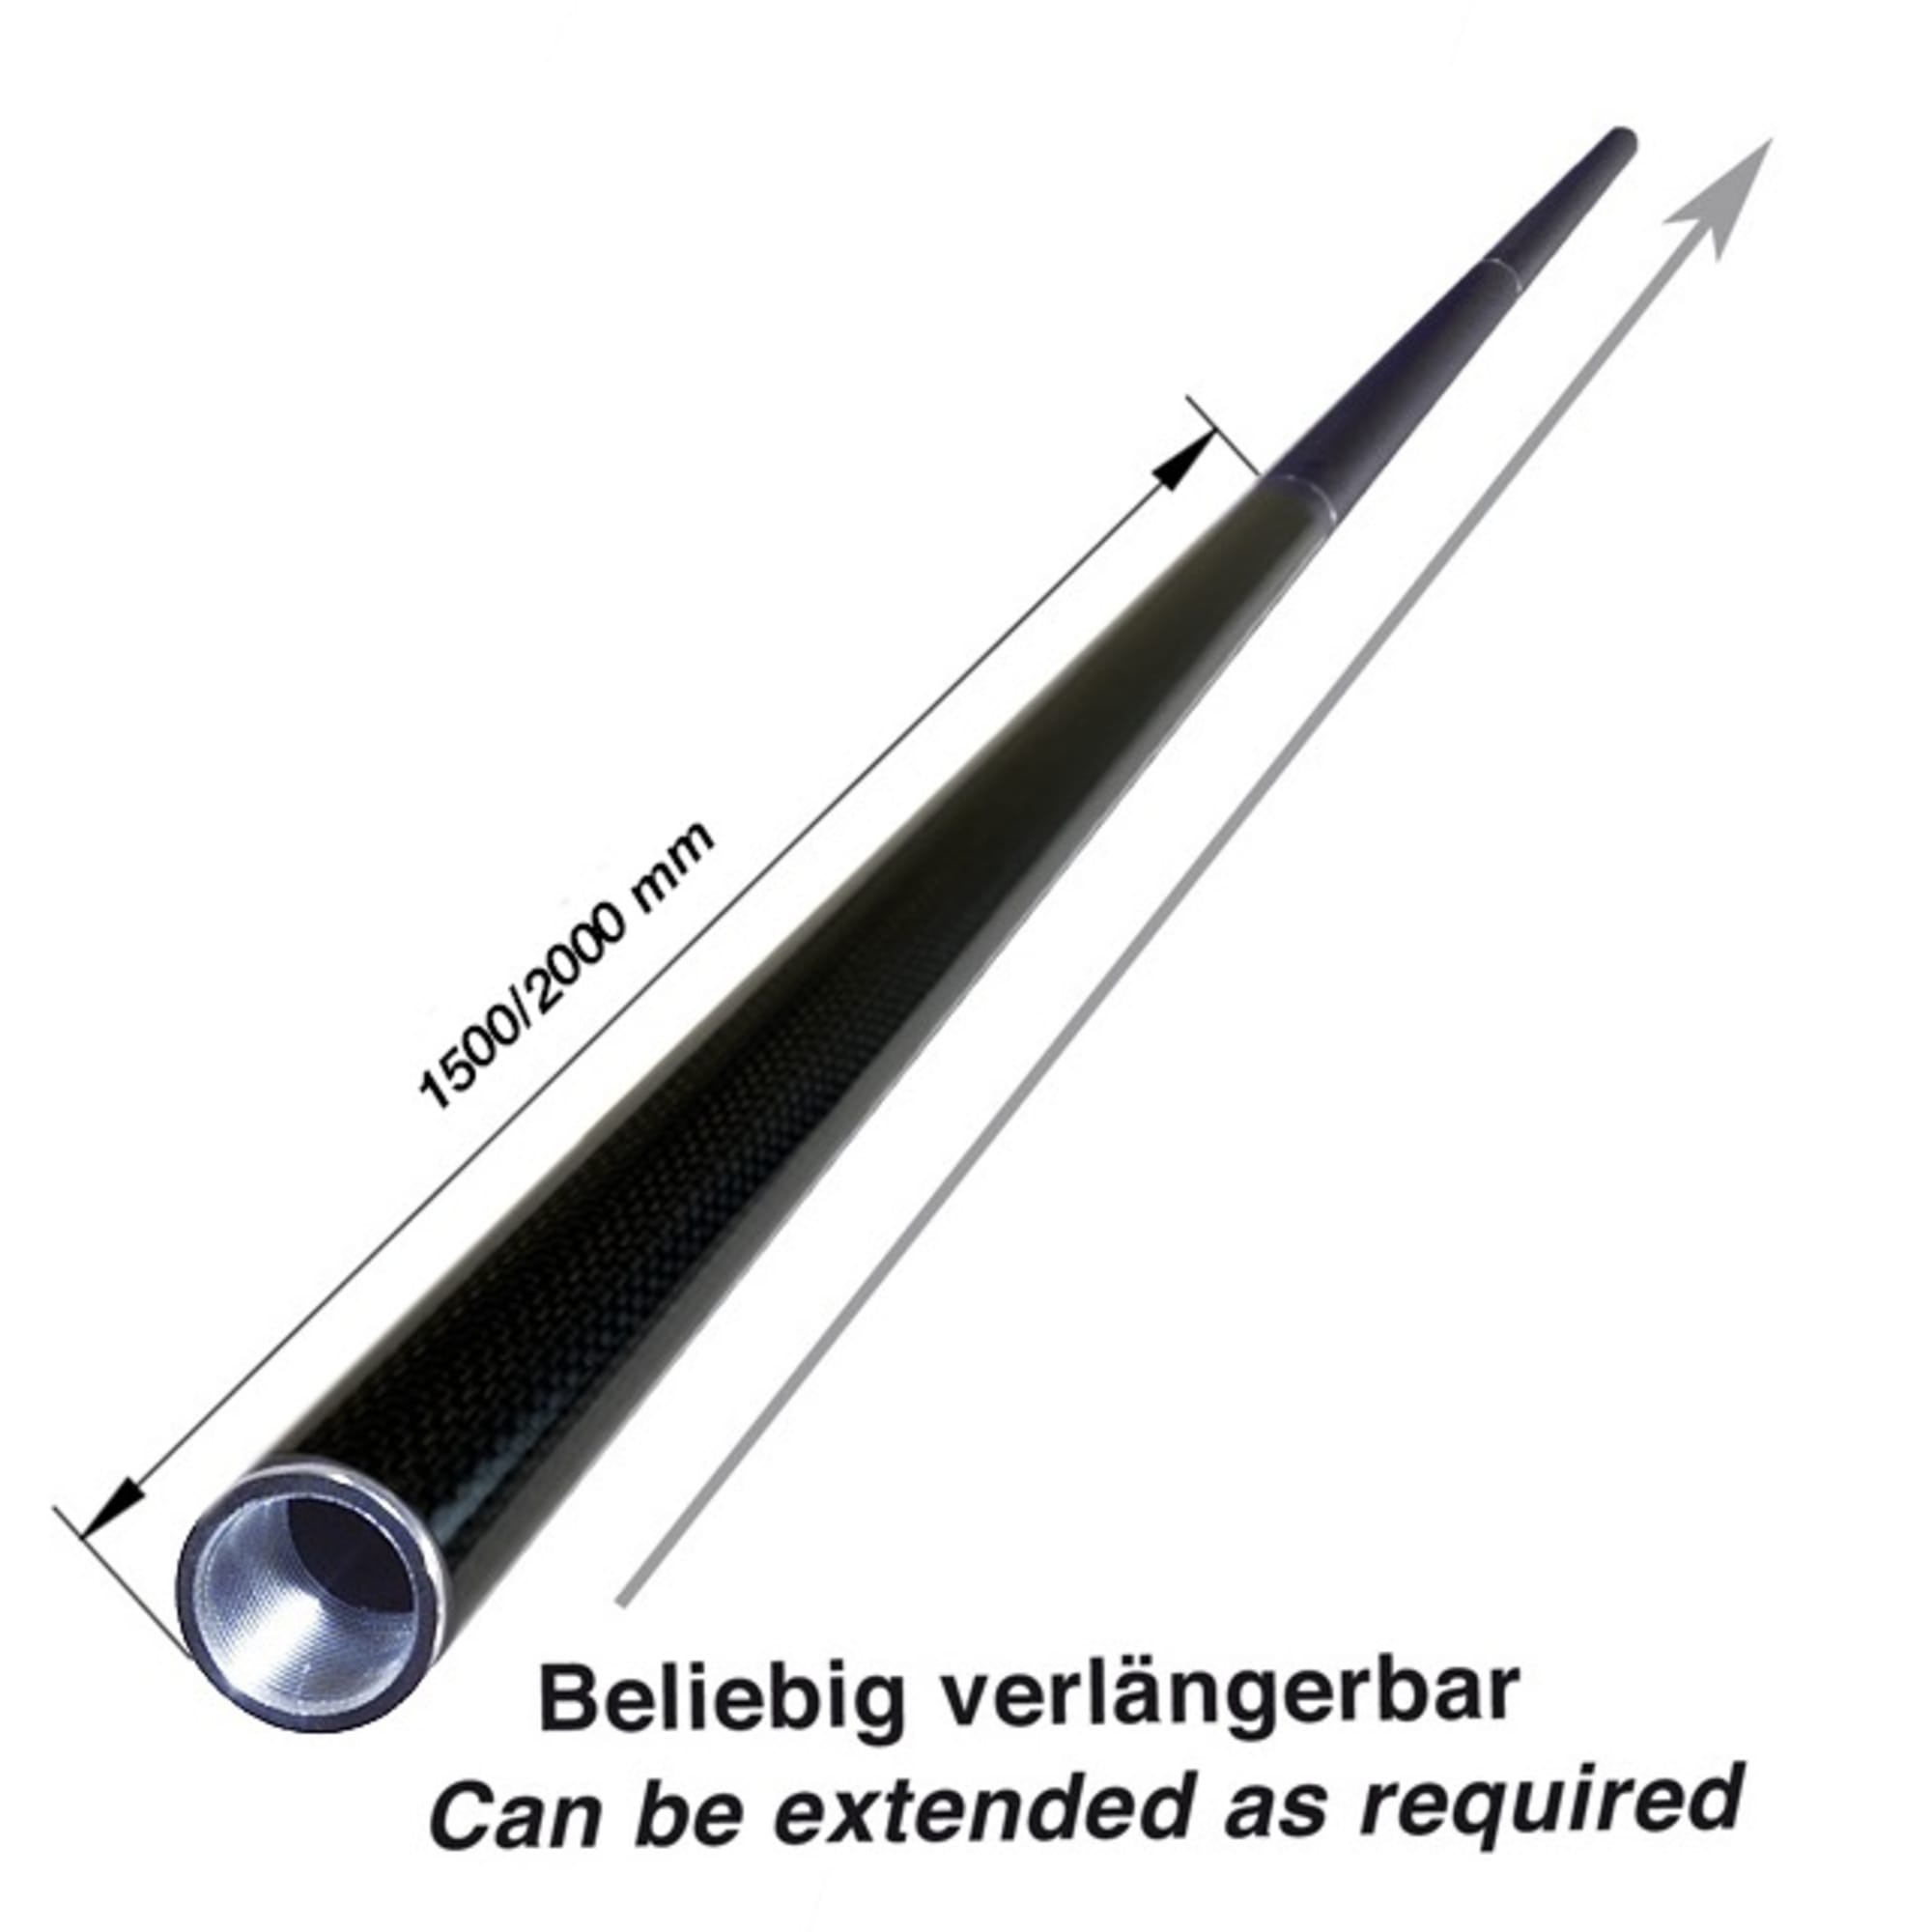 CARBON round tube wound, 3k-PW (Ø 32 x 28) with threaded inserts, image 3